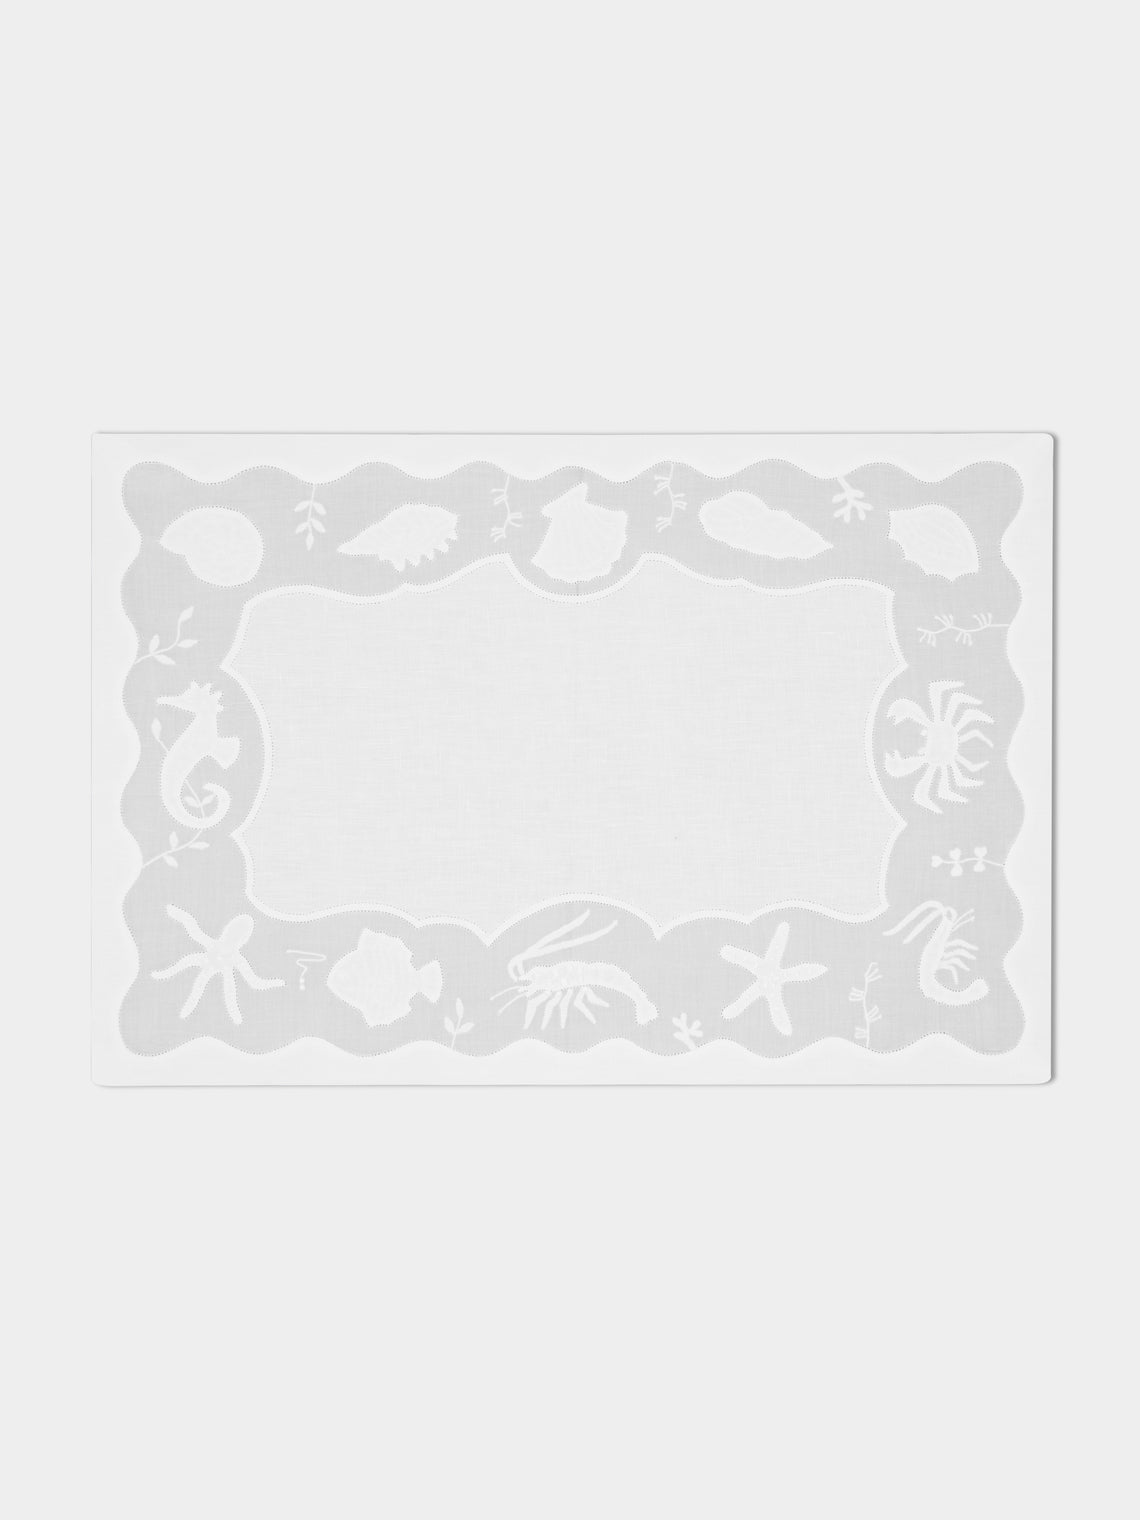 Taf Firenze - Sea Life Hand-Embroidered Linen Placemats (Set of 6) -  - ABASK - 